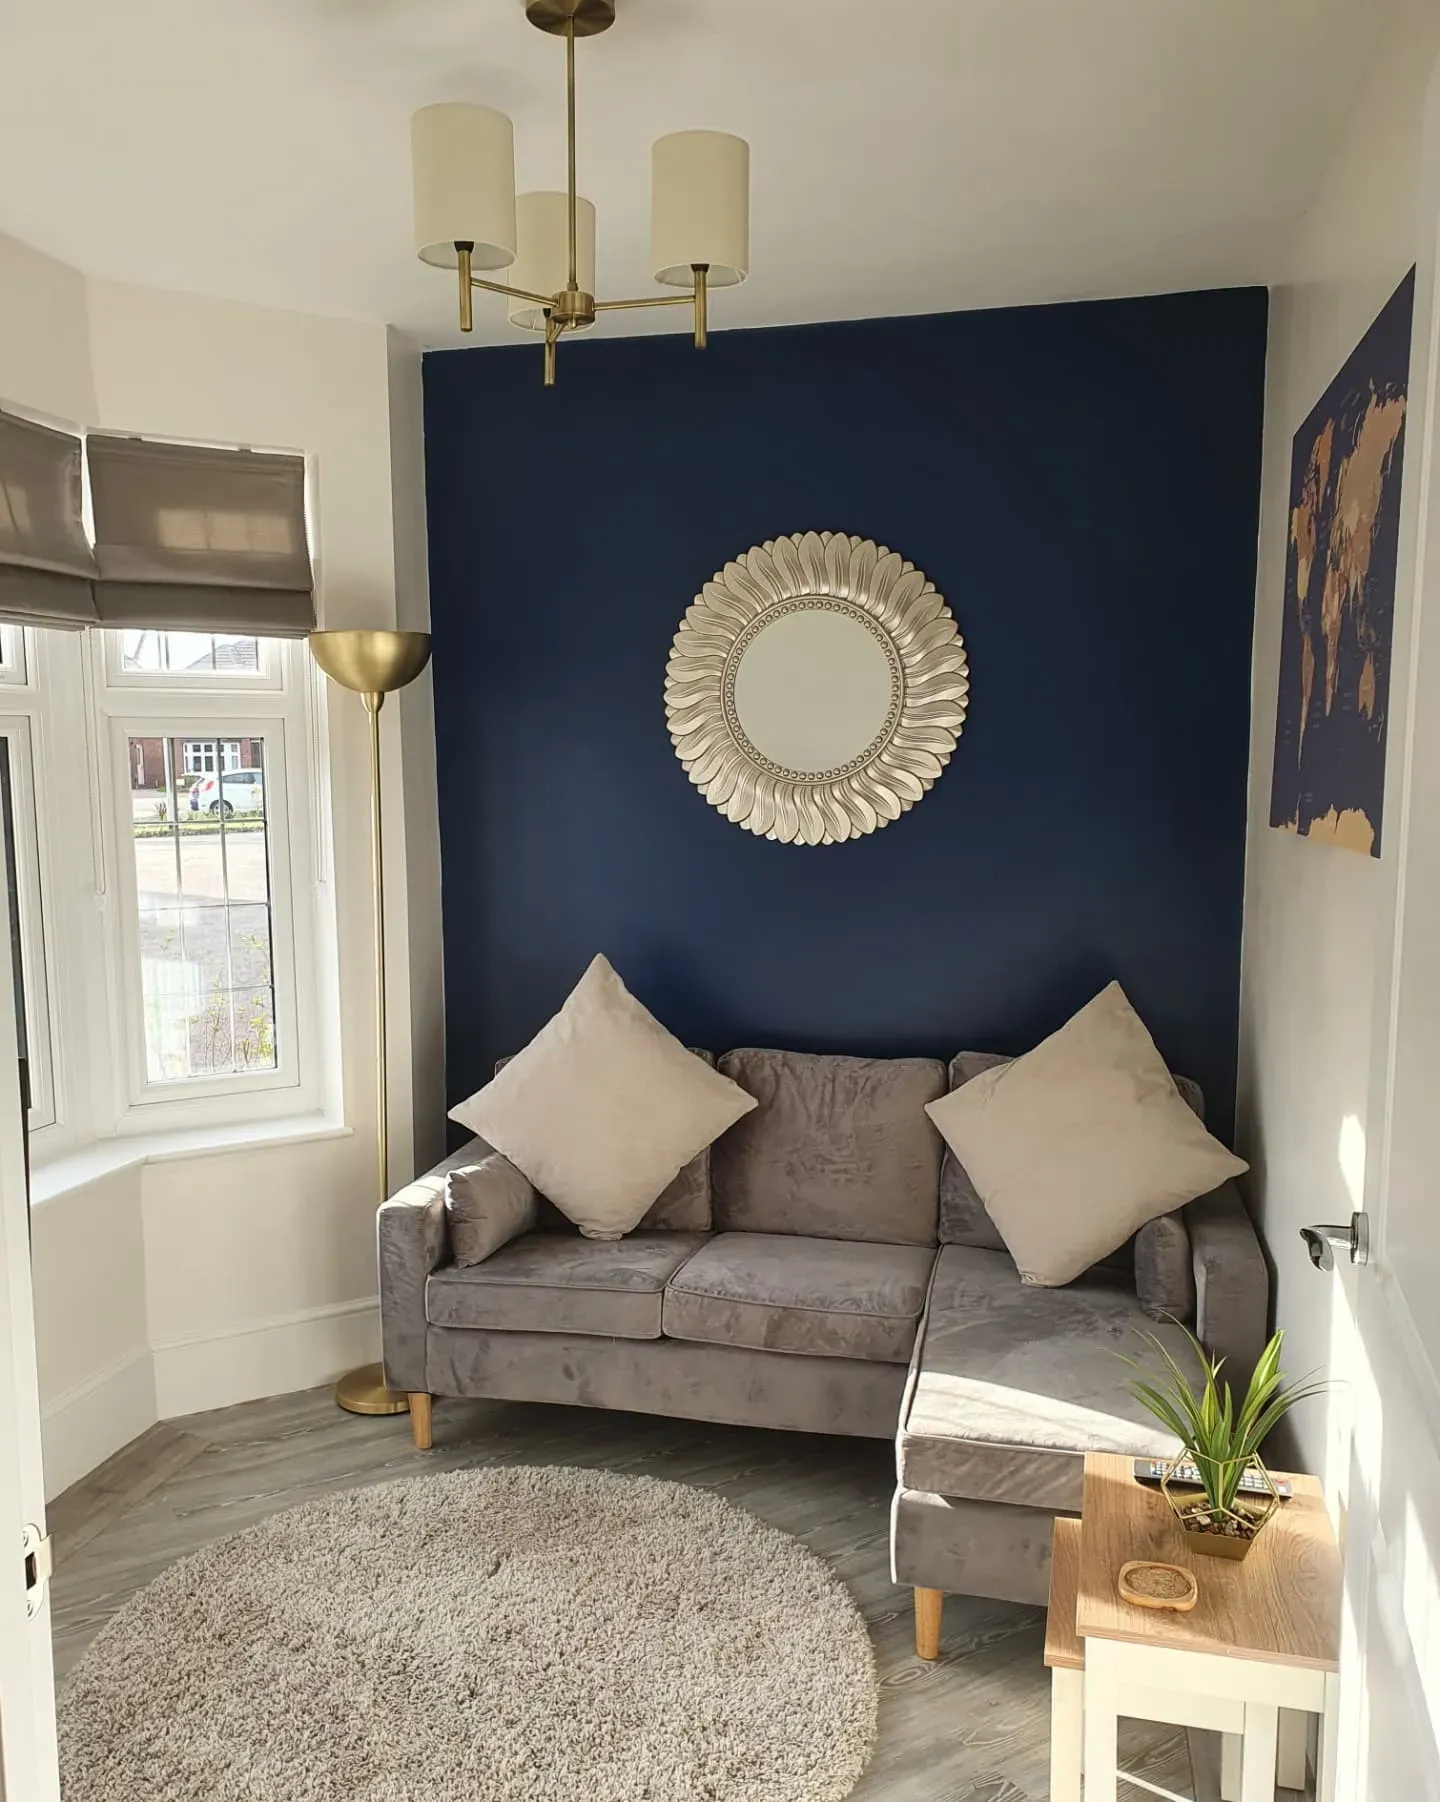 Dulux Timeless living room interior with blue accent wall